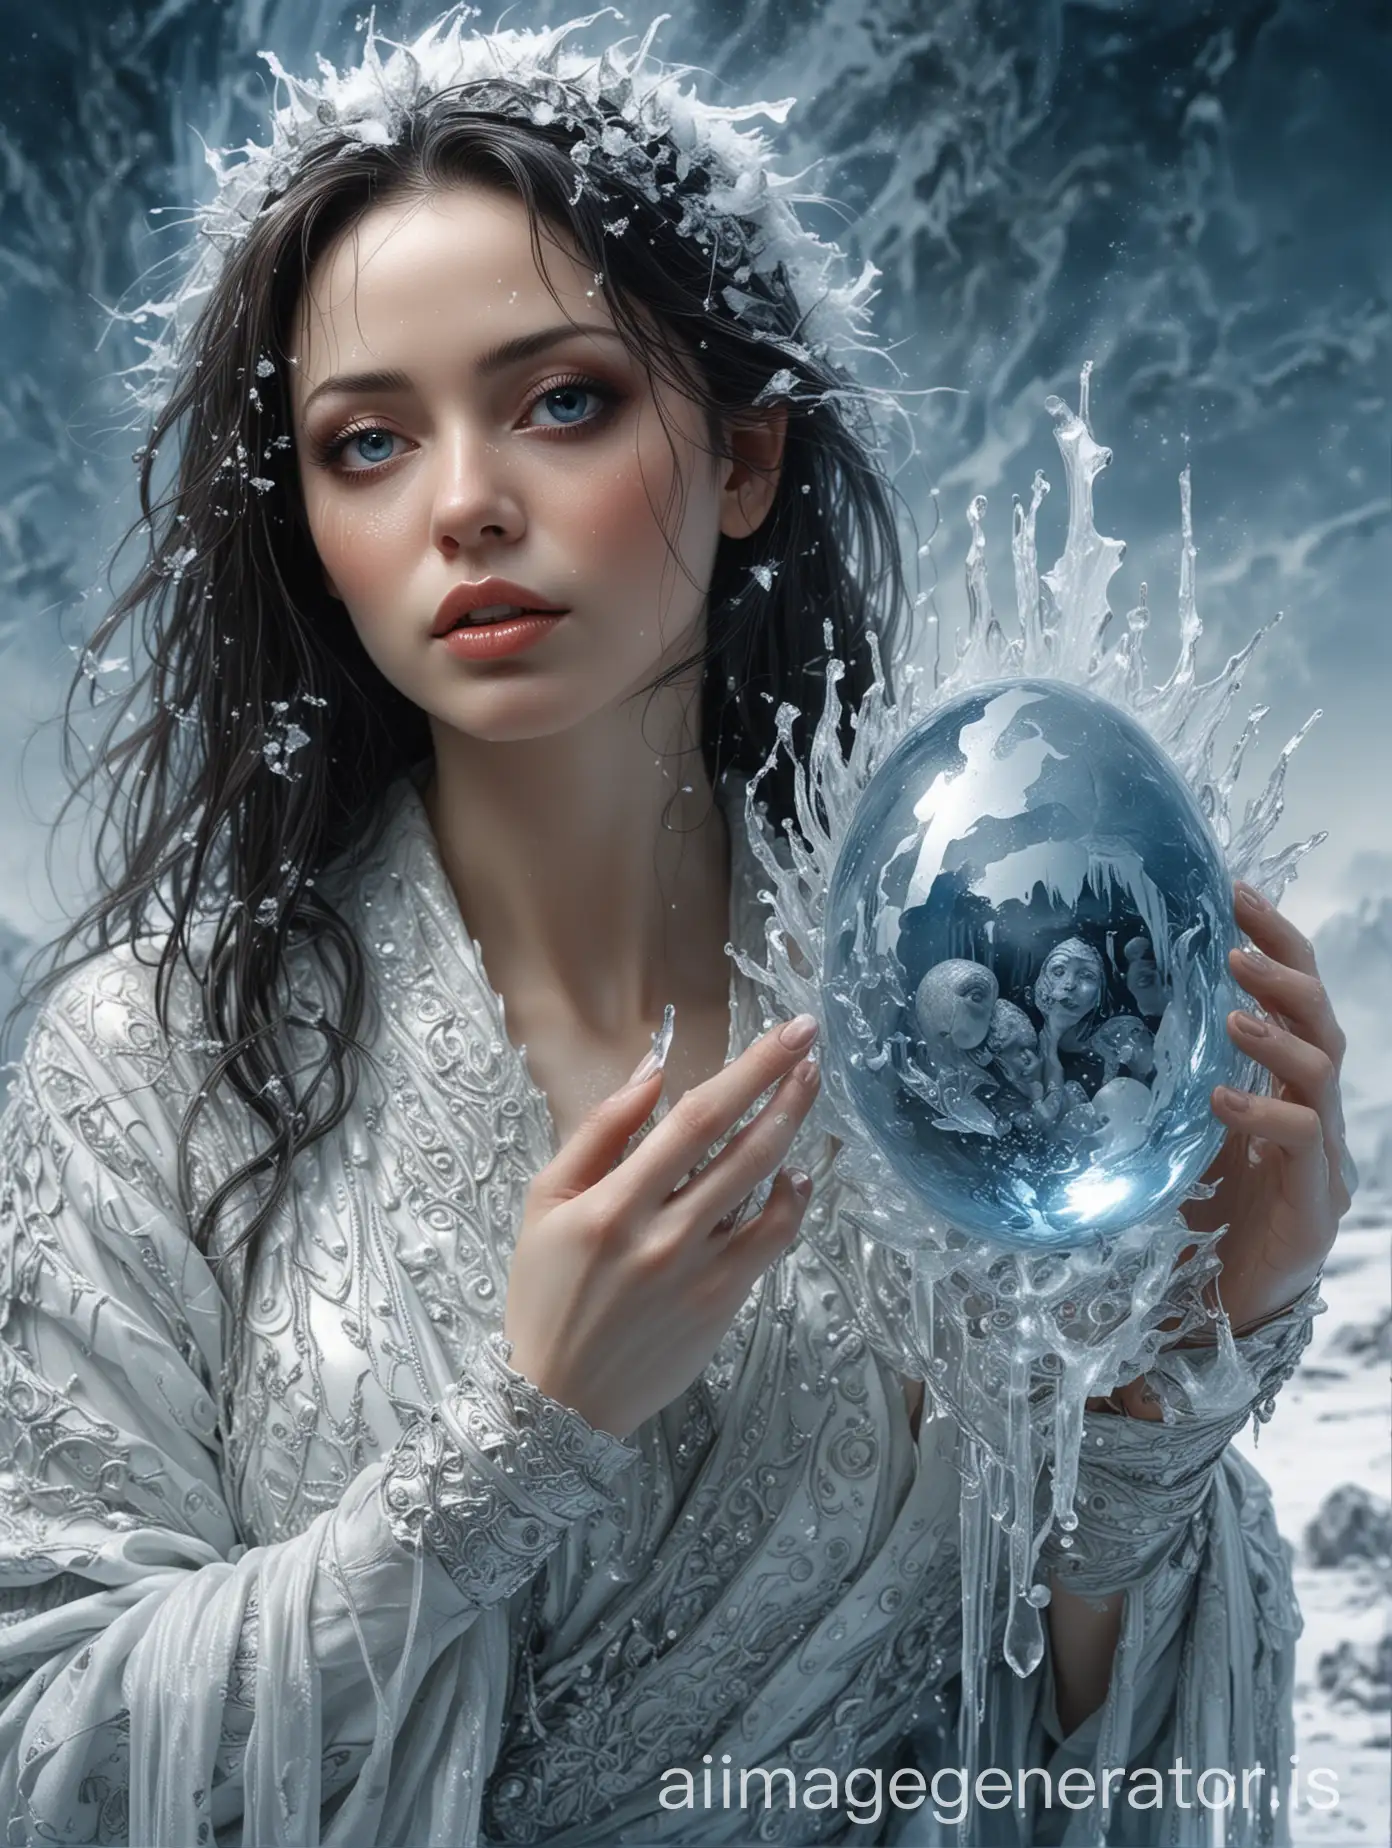 fullbodyview, Hajime Sorayama, luis royo art style, Benoit B. Mandelbrot art style, filigree, Michelle Gomez glass-face covered in frostbite, looking at the egg, she is holding in her arm an dragon egg made of lava and fire,  woman's face is glacial shiny face smooth as glass, glass transparent, eyes glowing blue,  glass glossy clothes, woman with a hair made of icicles, glass clear icicles are growing at her feet and climbing her leg, her face and skin is covered in frost, behind her a white winterscape